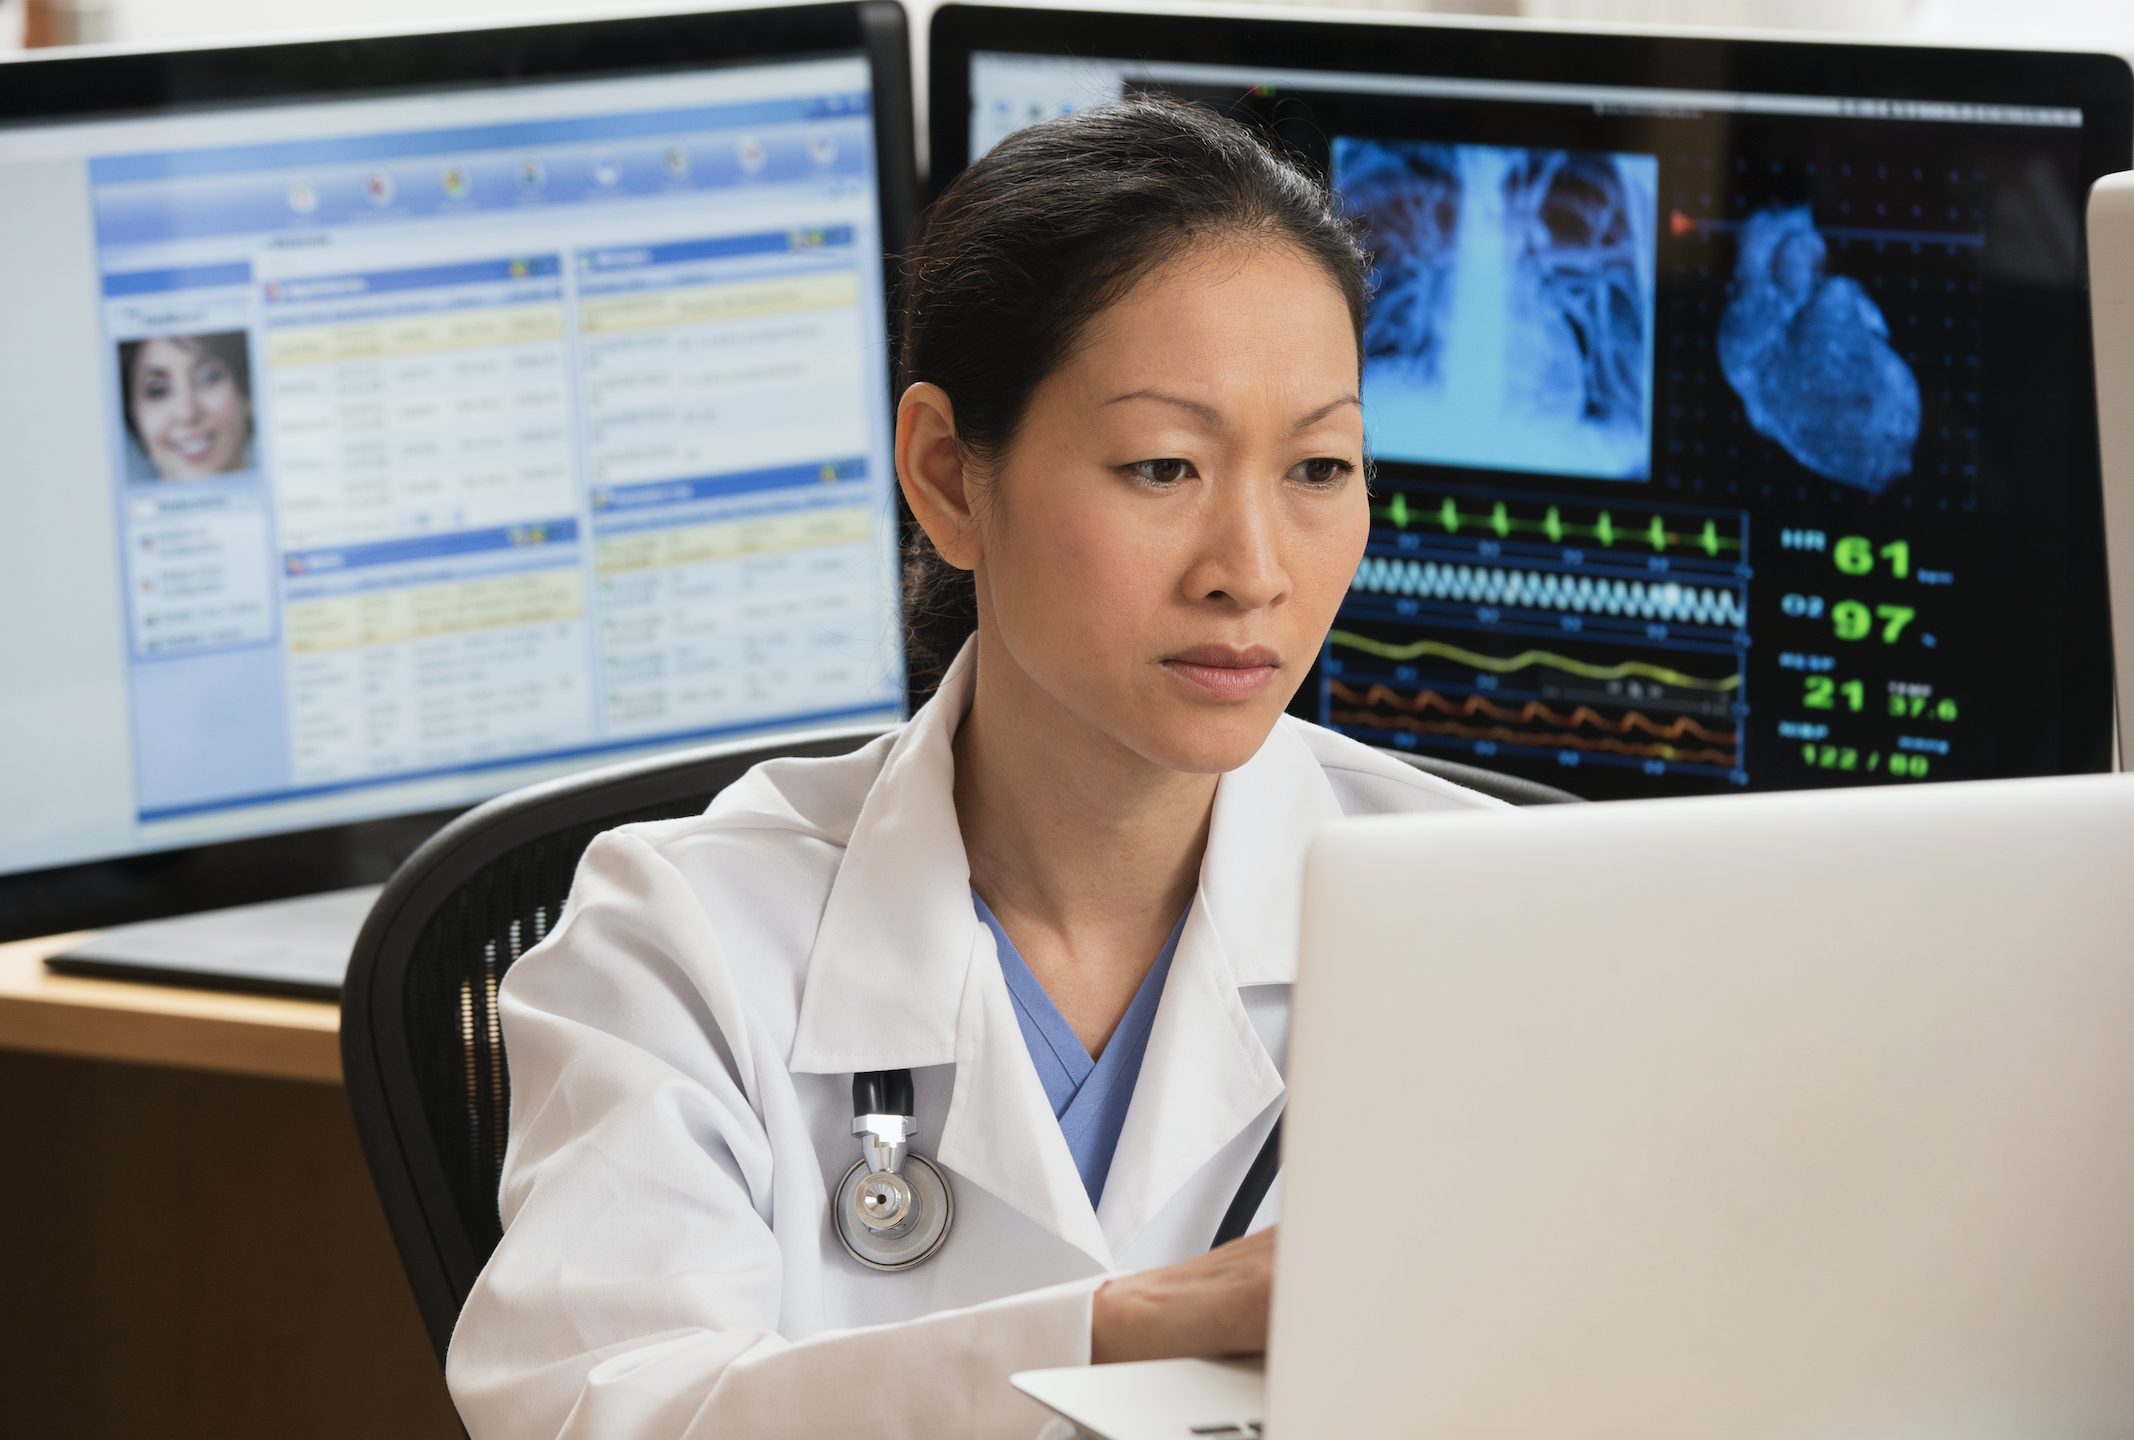 Digital Transformation and Patient Engagement